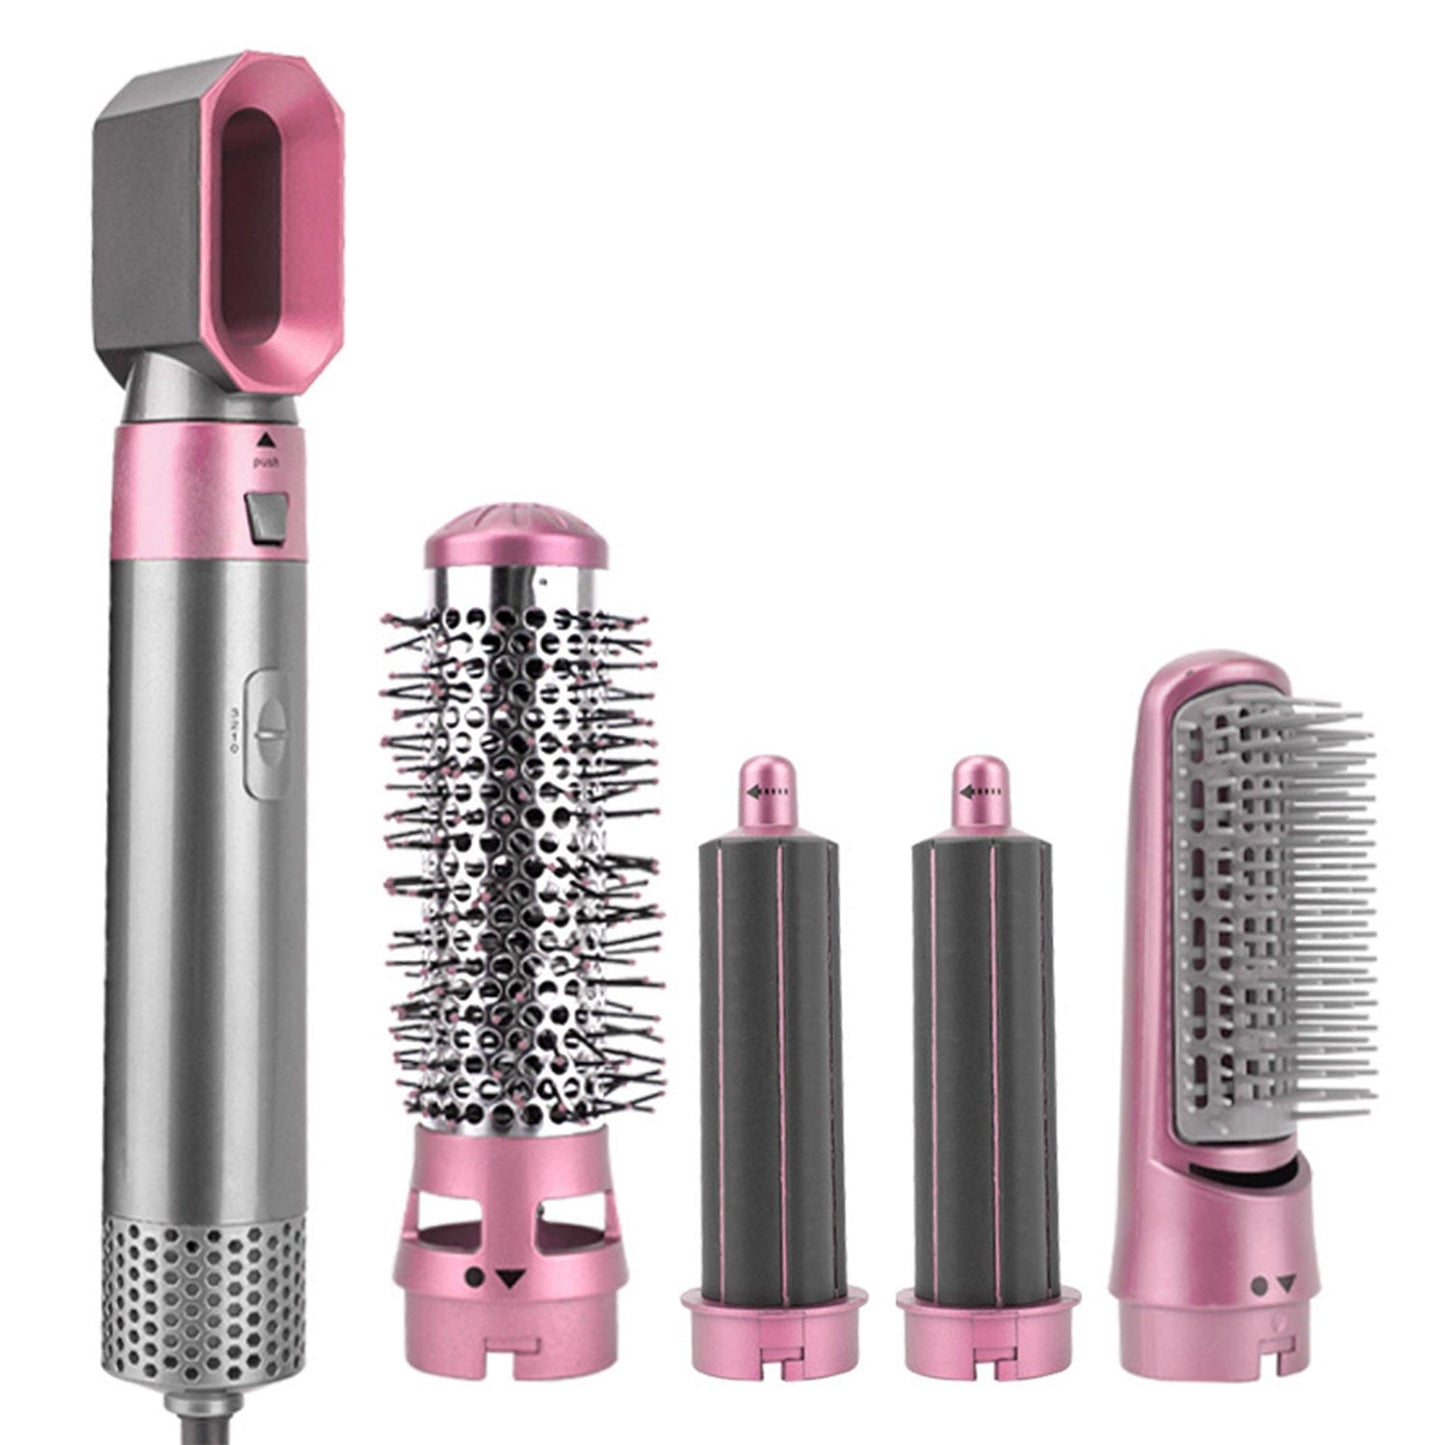 5 in 1 Styling Tools Blow Dryer with Ceramic Oval Barrel Aoxily CHN, Inc. All Rights Reserved.